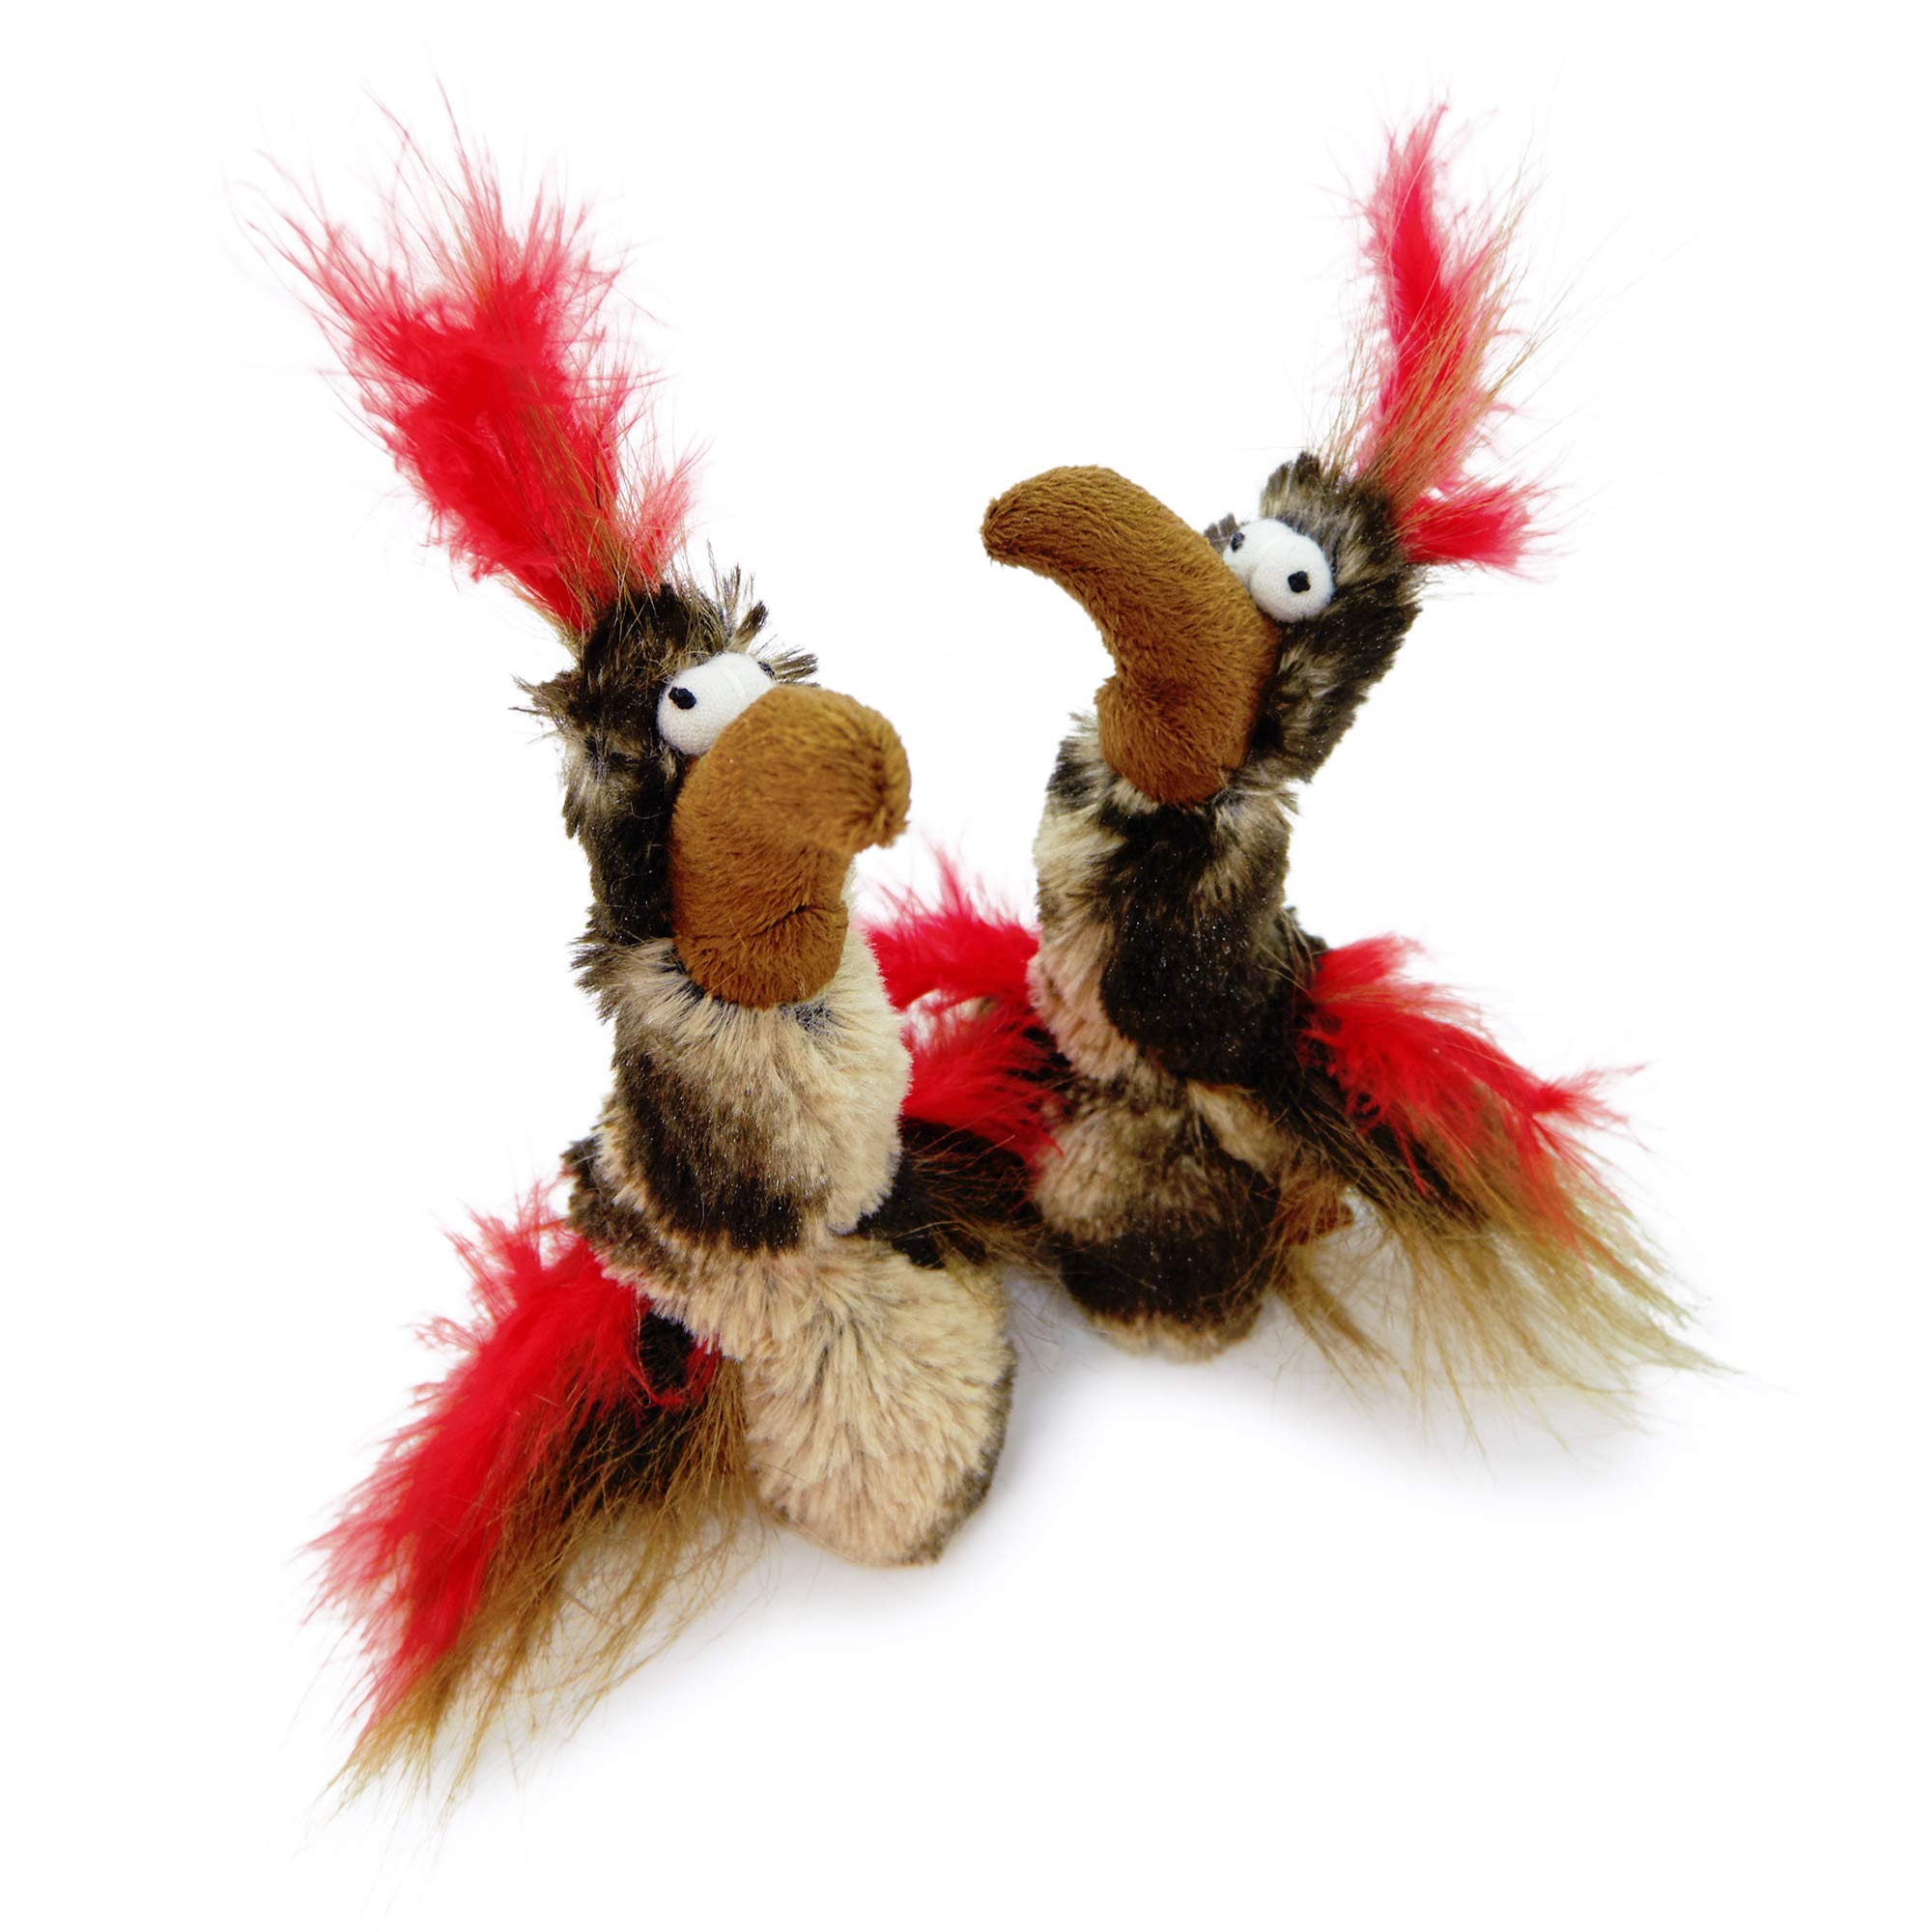 Book Cover Pet Craft Supply Co. Kitty Condor Crazy Catnip Cuddler Funny Cuddling Chasing Hunting Irresistible Stimulating Soft Plush Boredom Relief Interactive Cat Toy with Realistic Feathers, All Breed Sizes 2 Pack Red